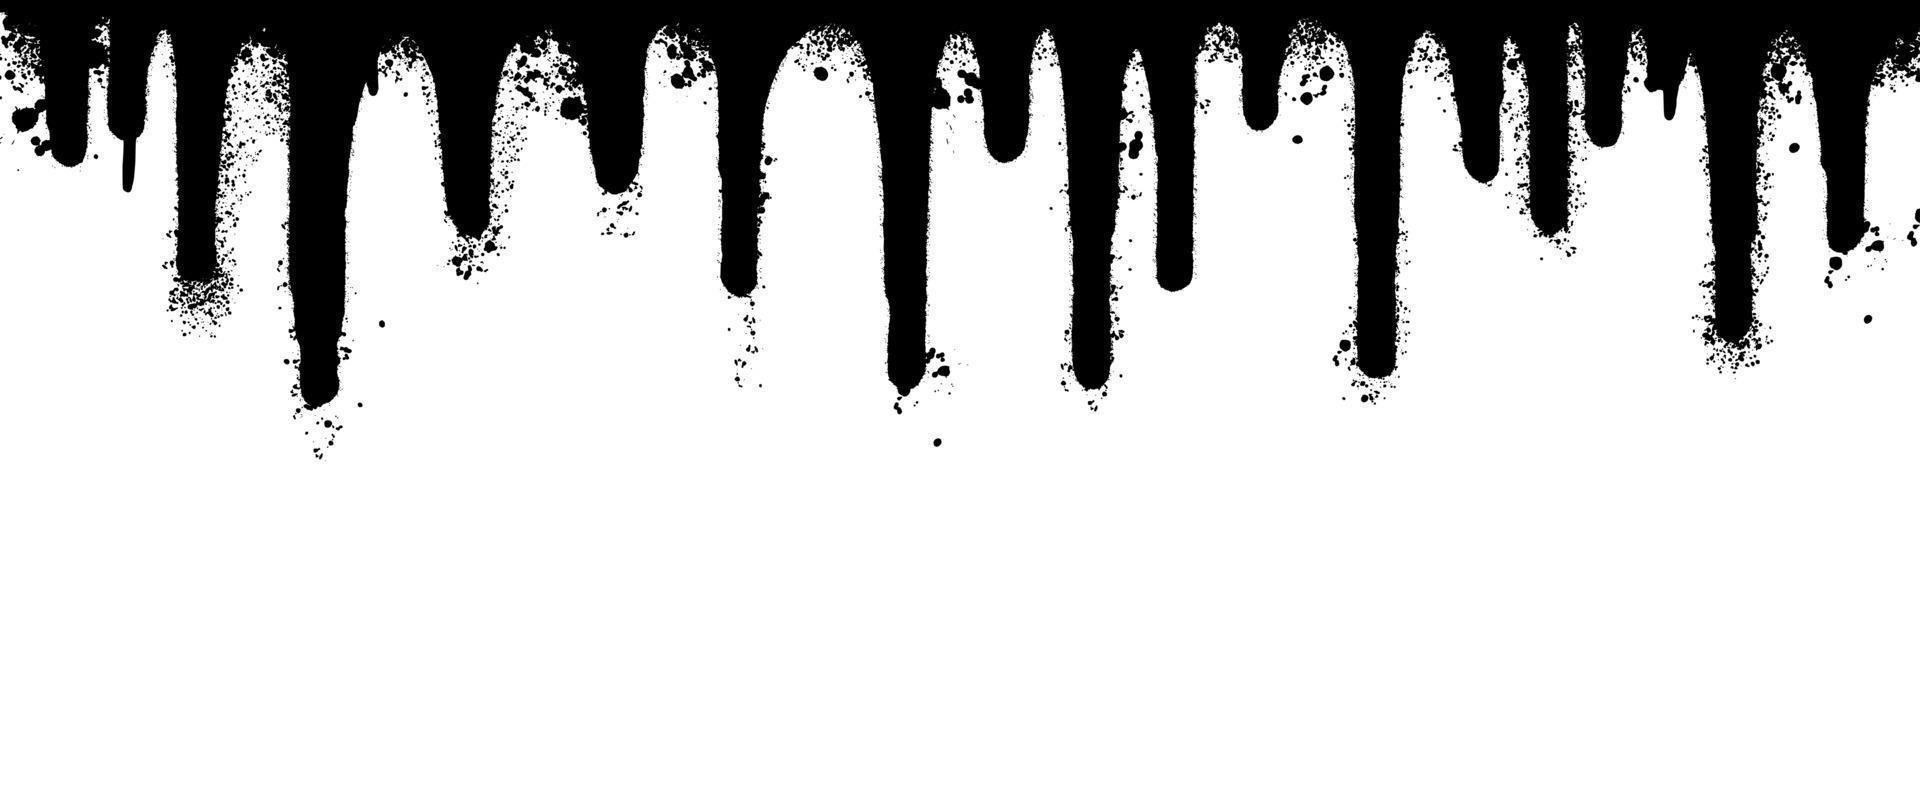 Graffiti Spray painted lines and grunge dots isolated on white background. Black ink splatter lines and drops on the wall vector illustration.